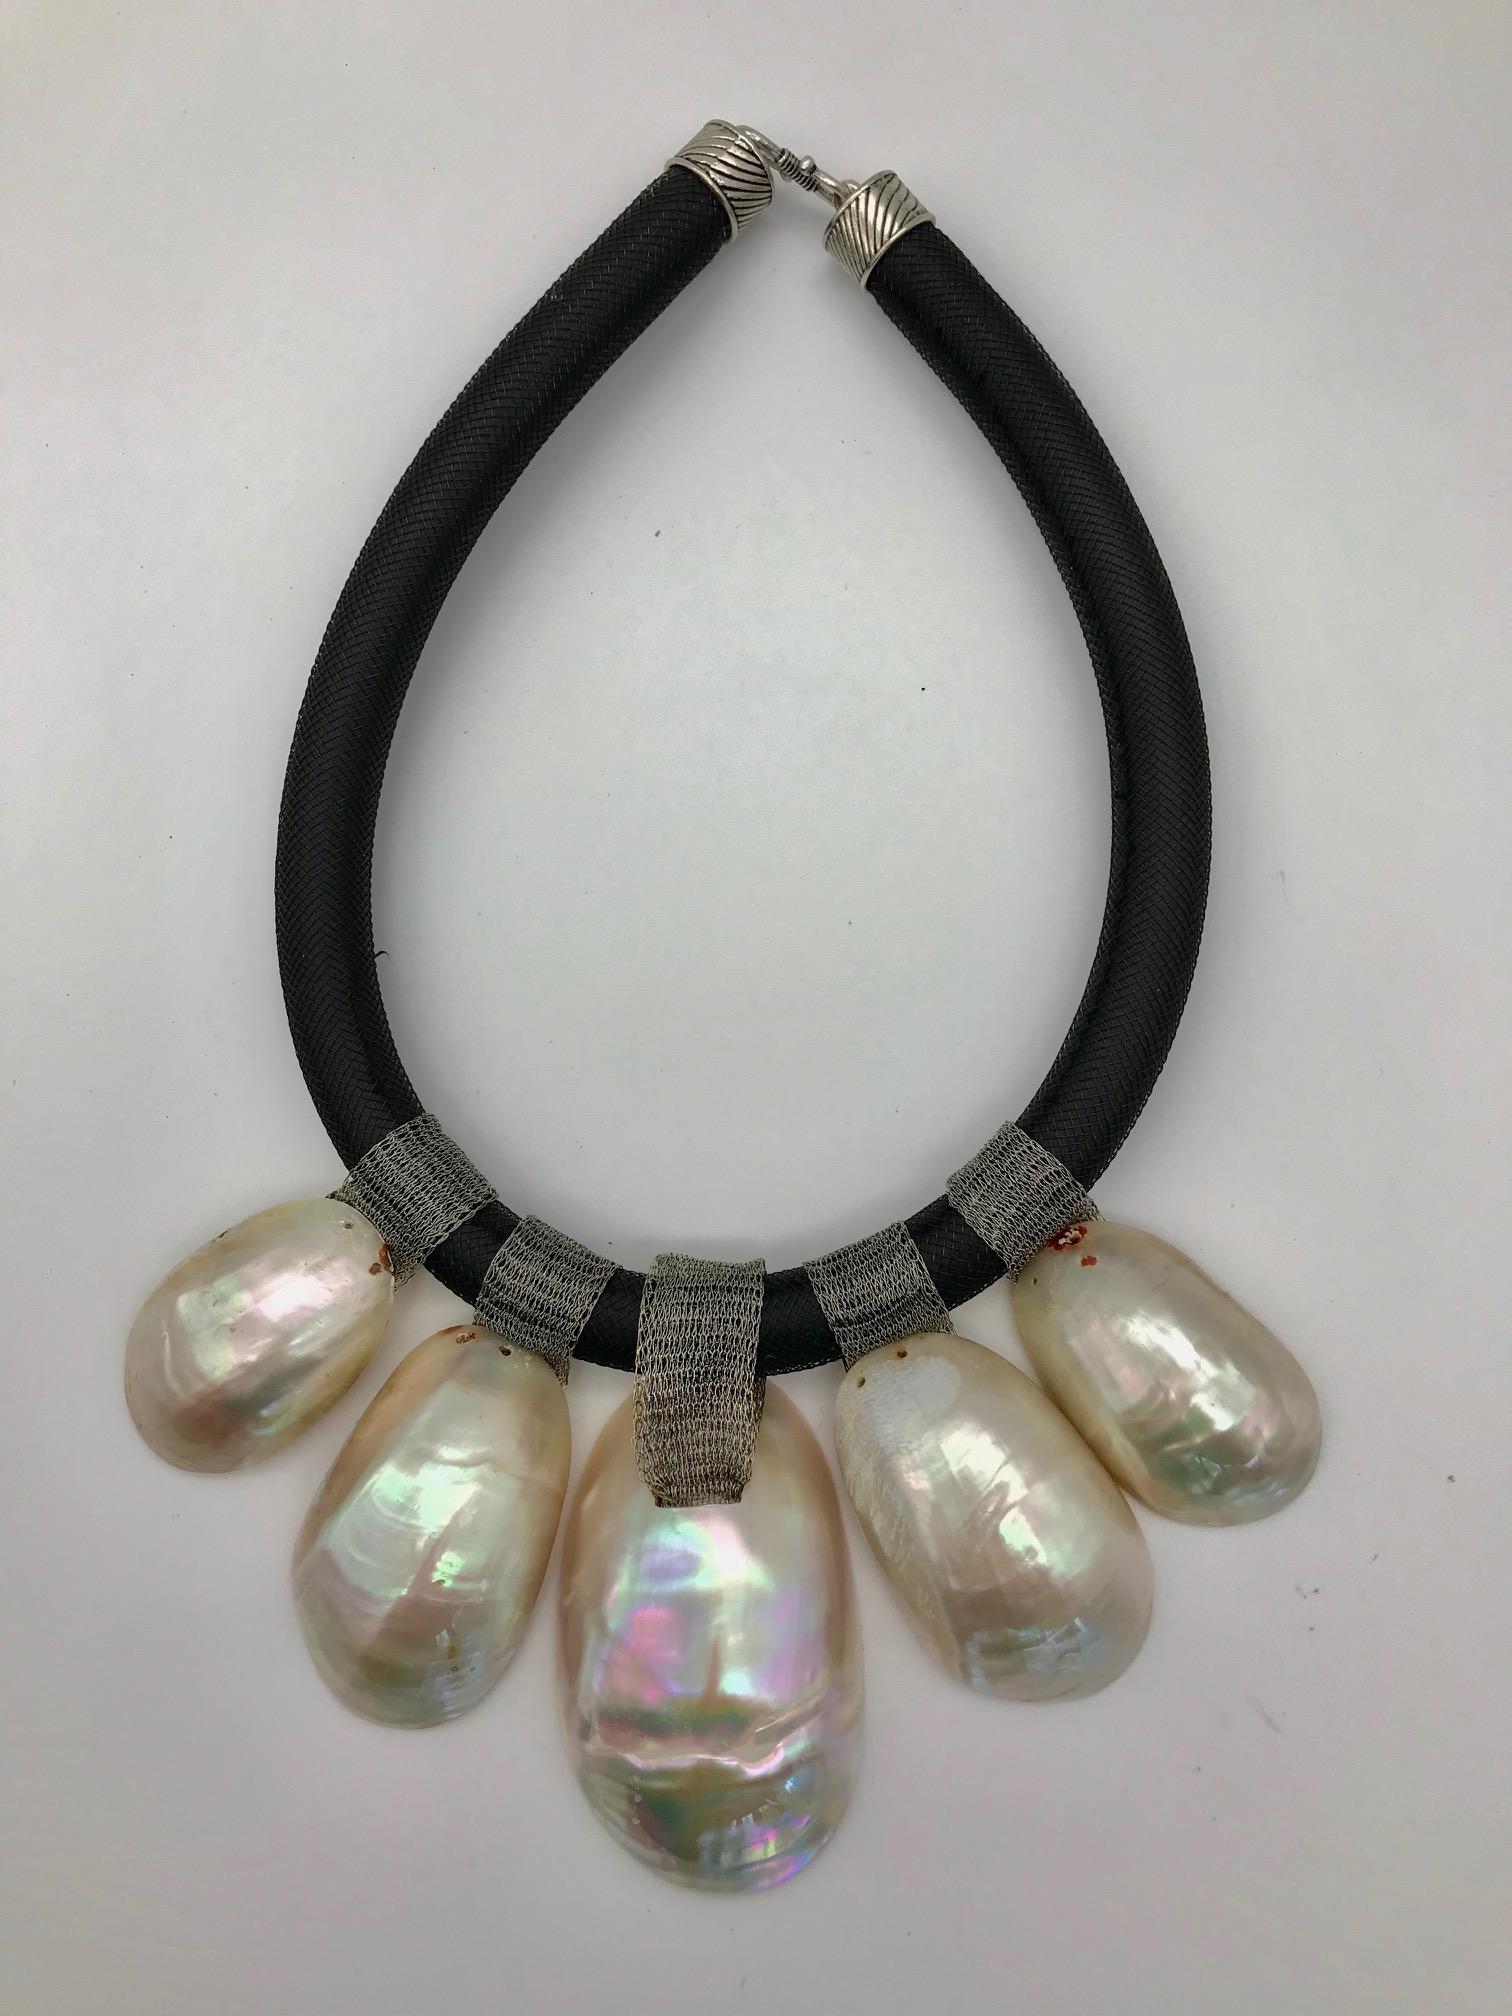 
This pink nacre Statement Necklace is eco–luxe and sustainable. The iridescent pink nacre used in this necklace has been up-cycled from hand cut and polished pieces produced during the French Deco period. Turbo was a favored material, for jewelry